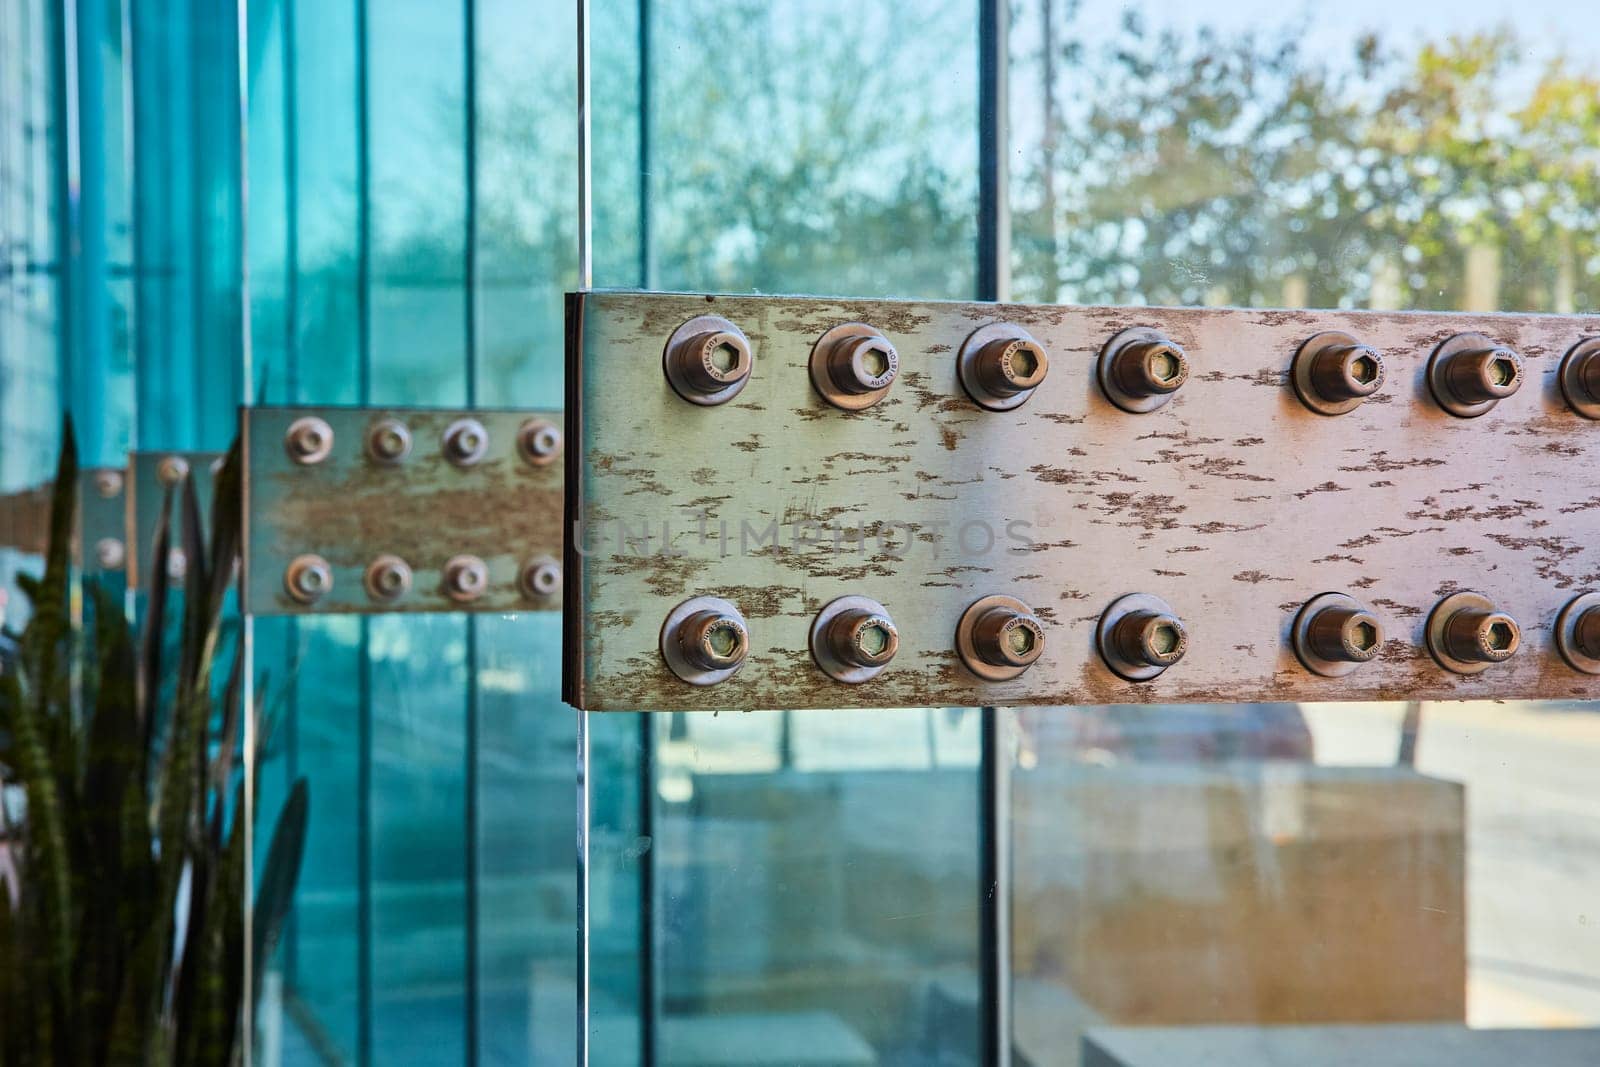 Weathered metal beam with bolts contrasts with reflective glass, Grand Wayne Convention Center, Indiana.